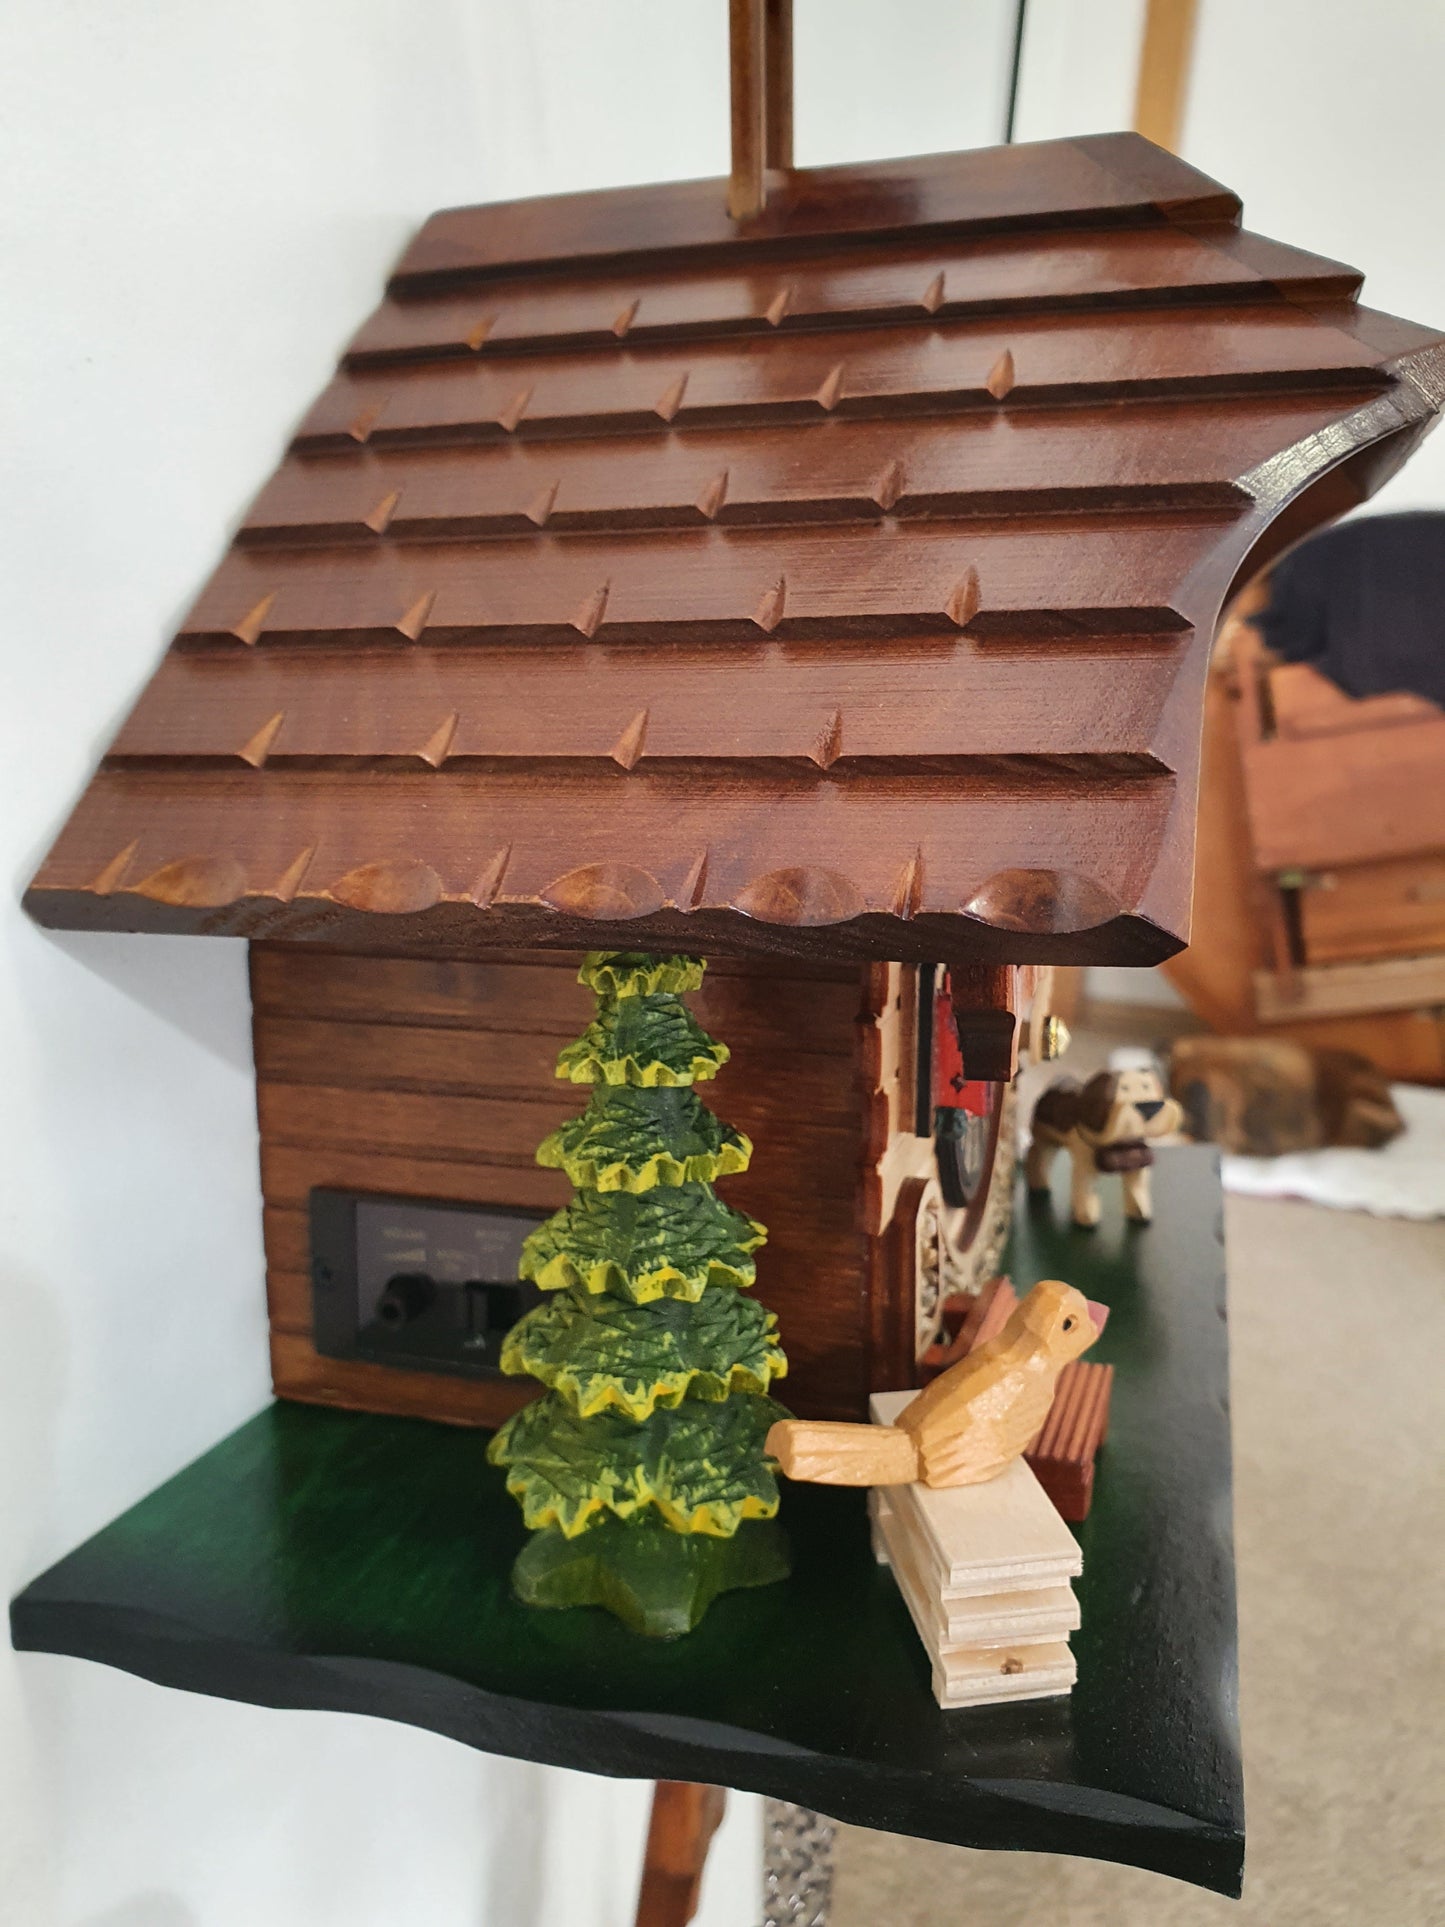 Amazing Chalet Quartz Musical Cuckoo Clock With Dog & Bell Tower. Made In Germany With Free Delivery Across Australia. Cuckoo Clock [clocktyme.com] 